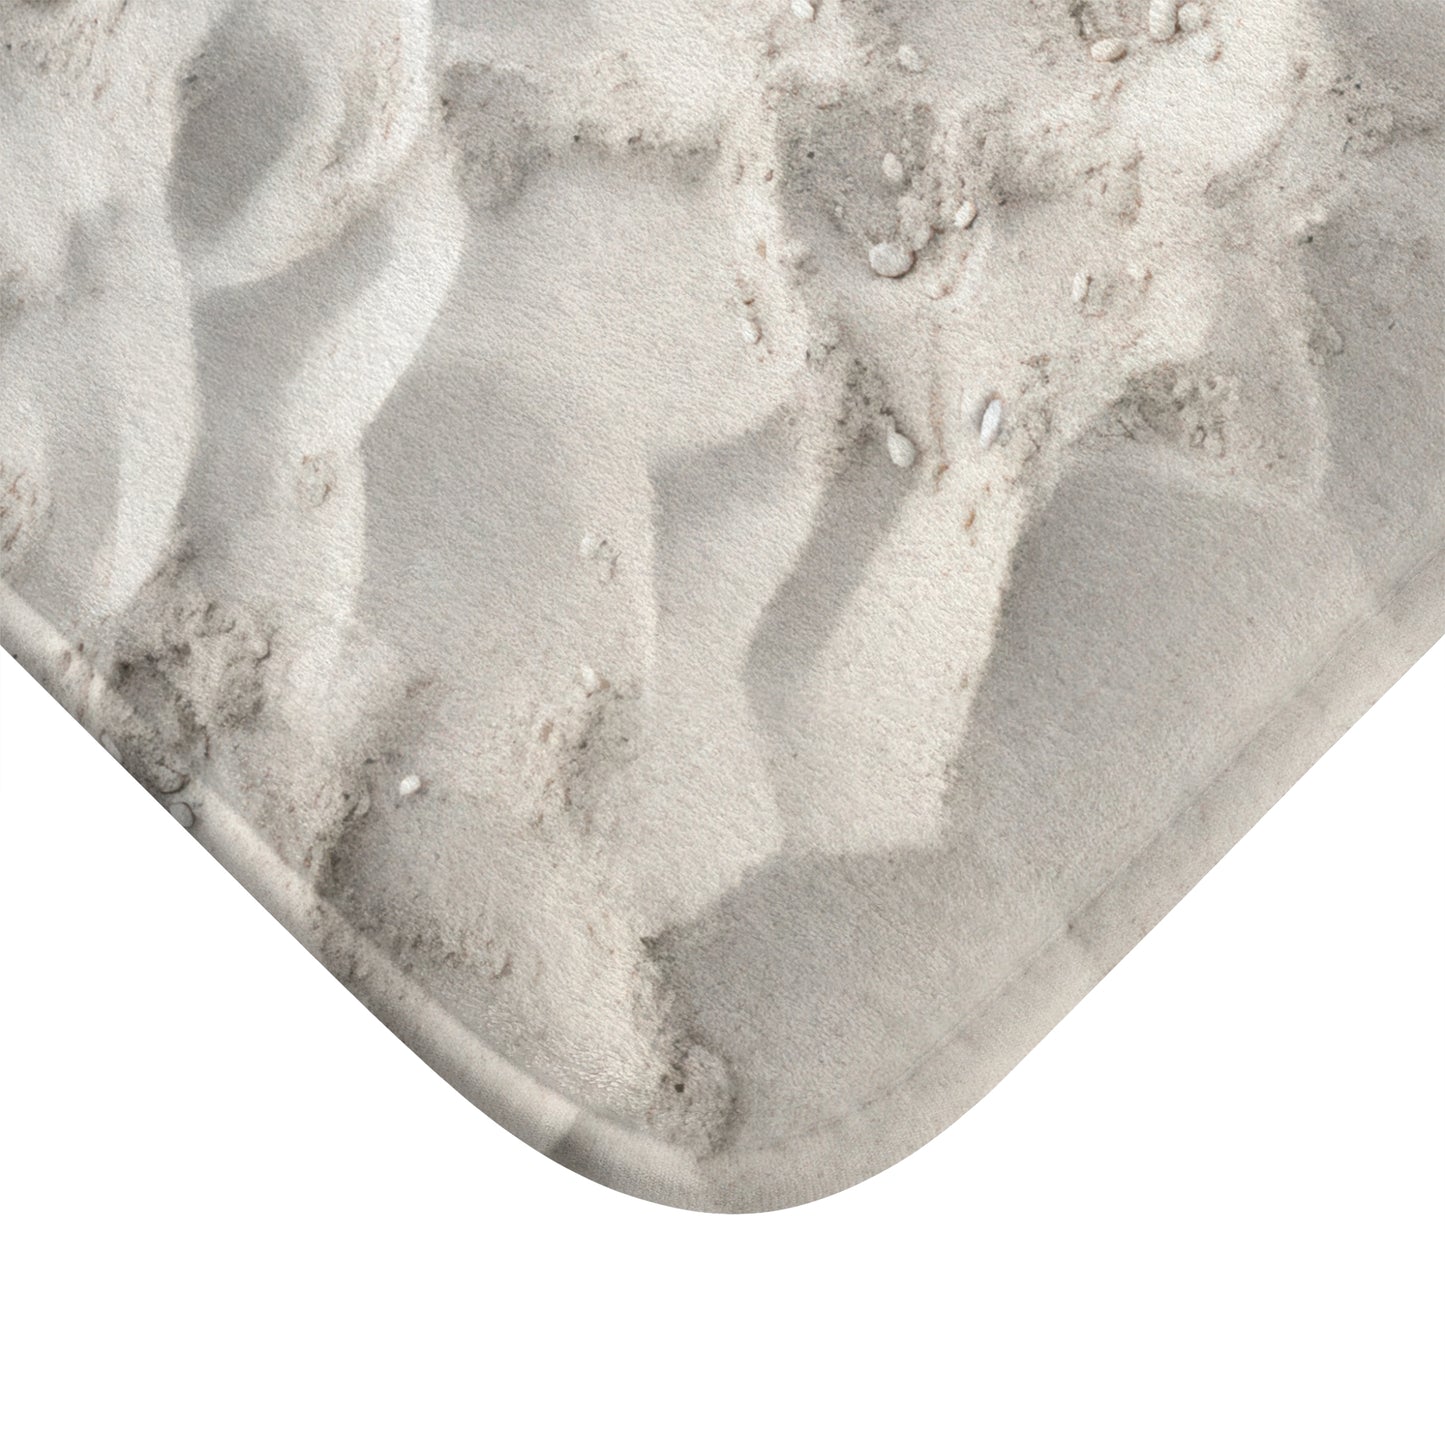 Transform your bathroom into a serene coastal retreat with Walking On Sand - Decor Bath Mat. The captivating white sand beach graphic, crafted from durable 100% microfiber, creates a tranquil haven. Its anti-slip backside ensures stability and the detailed binding guarantees long-lasting quality.